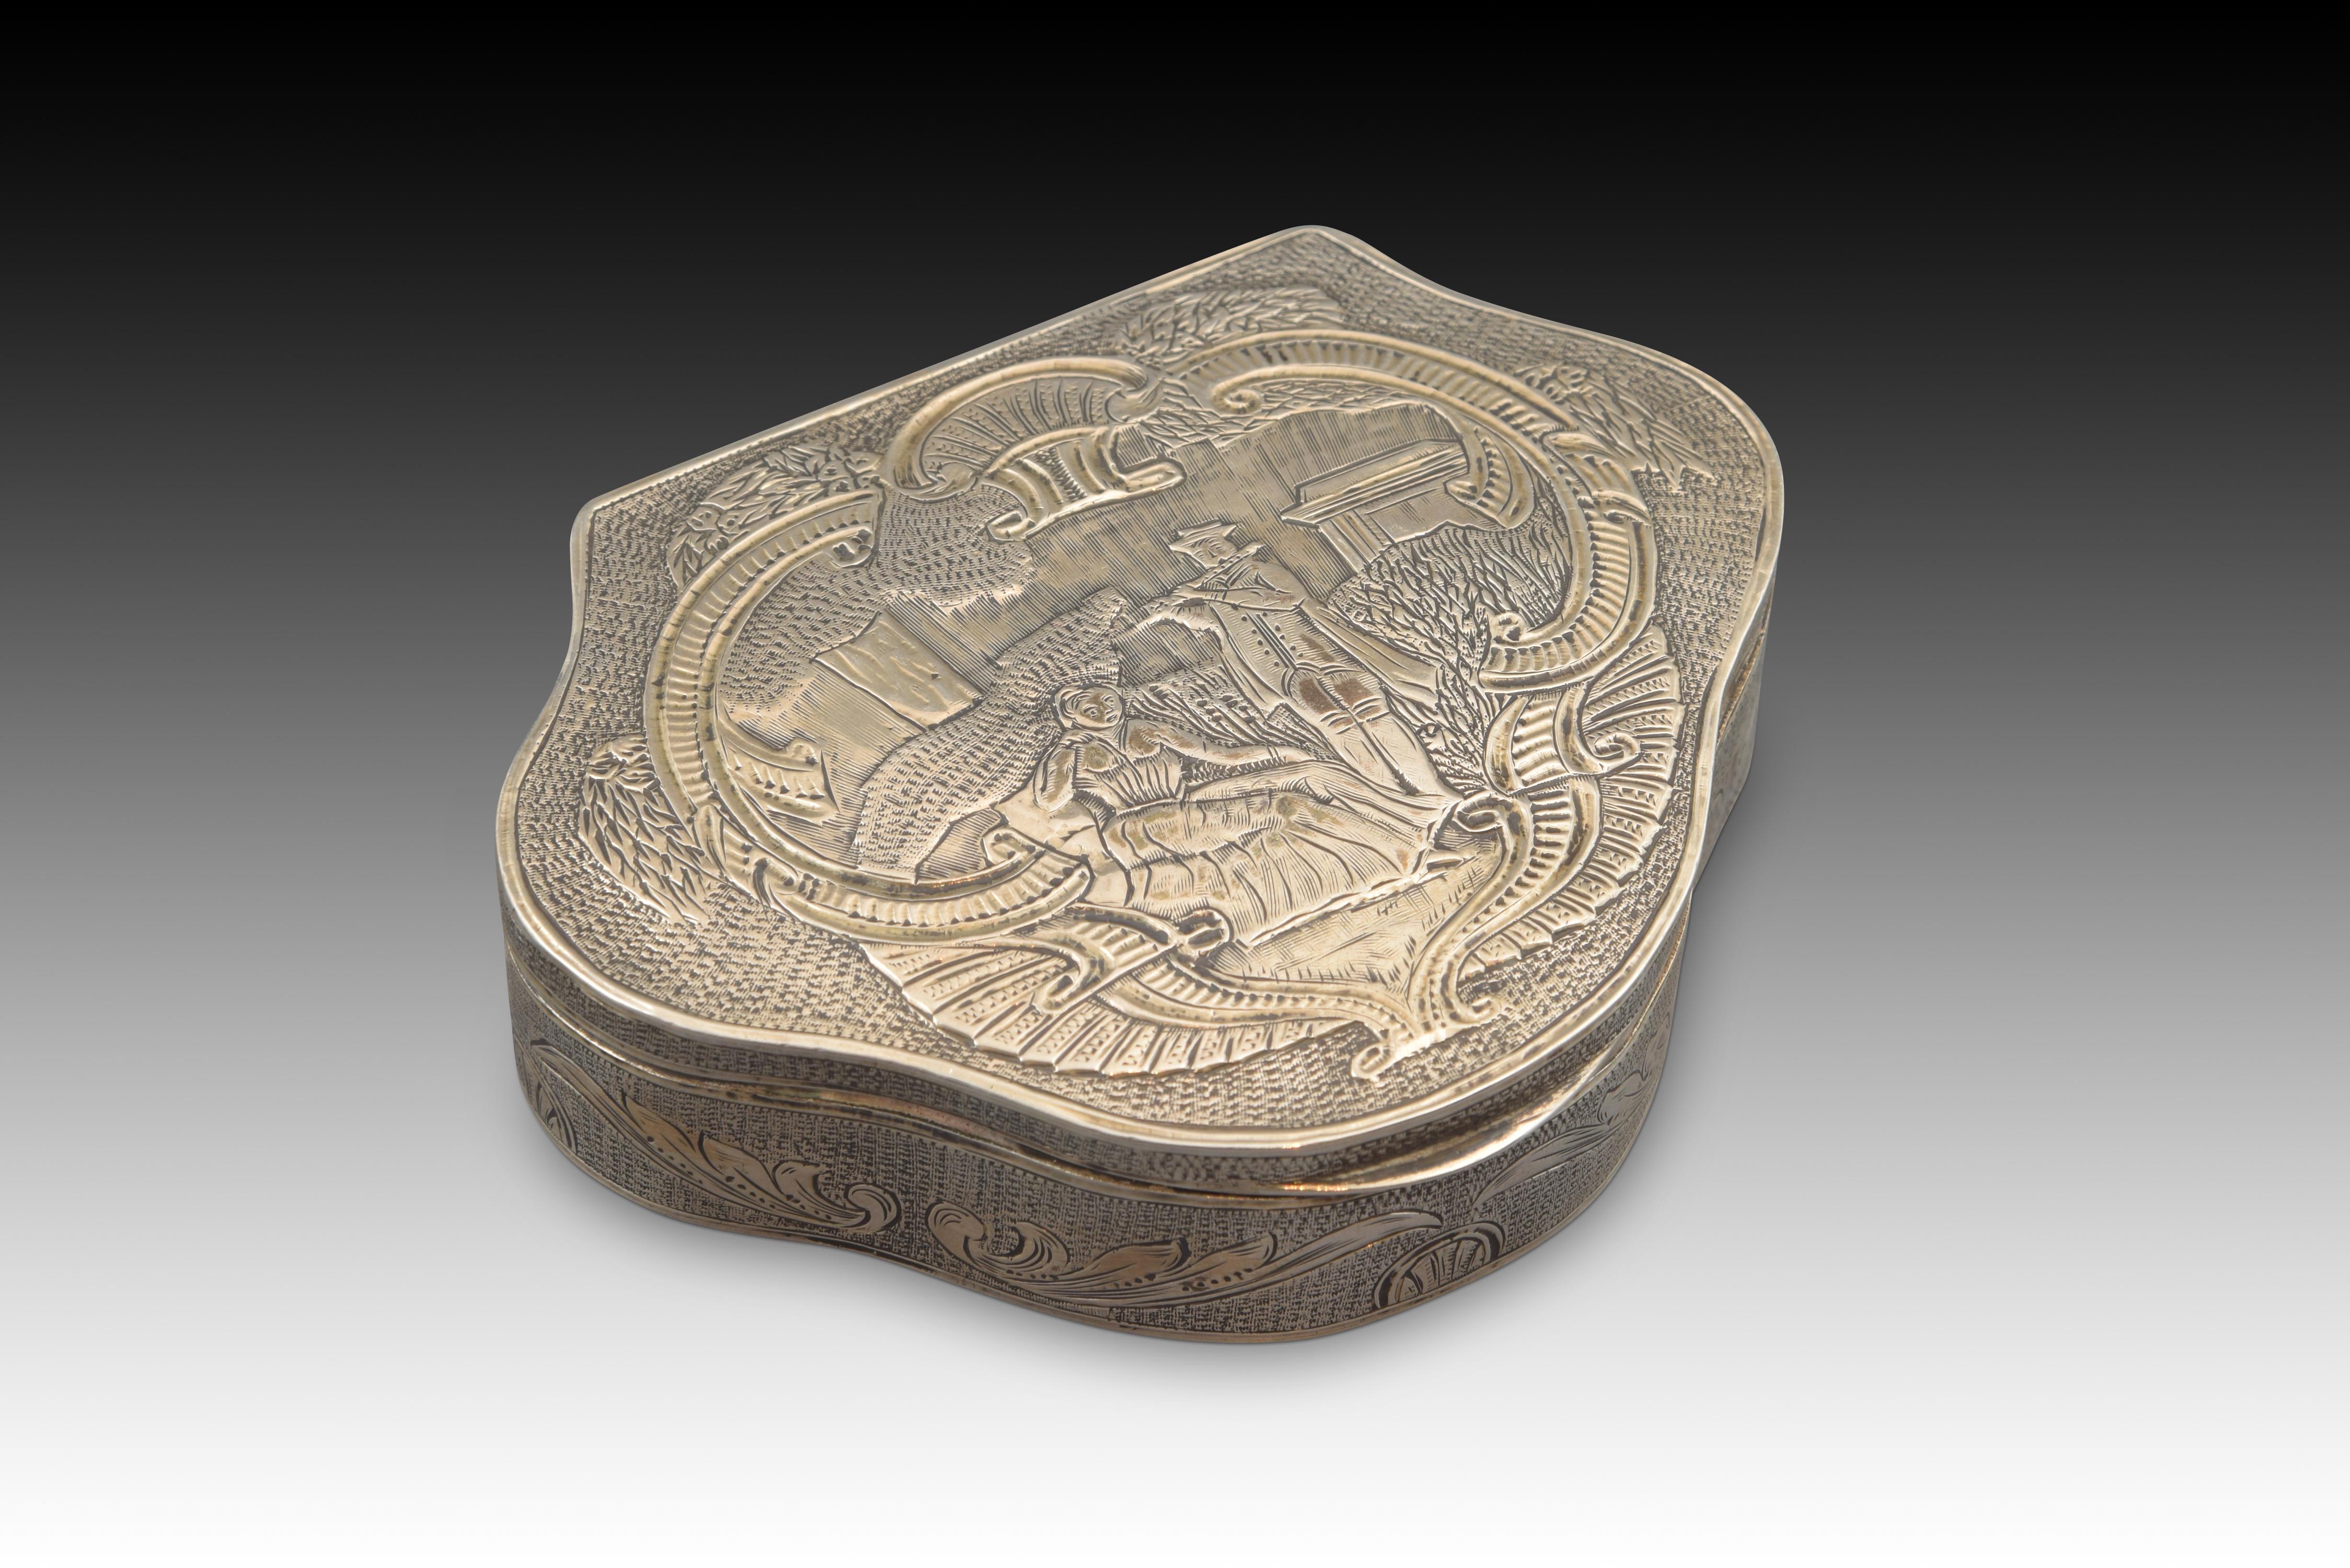 With hallmarks.
Three-lobed flat-top box made of silver in its color decorated on the edge and lid with elements on chopped luster. The upper part presents a scene framed by scallops and elements reminiscent of Rococo, starring a couple located in